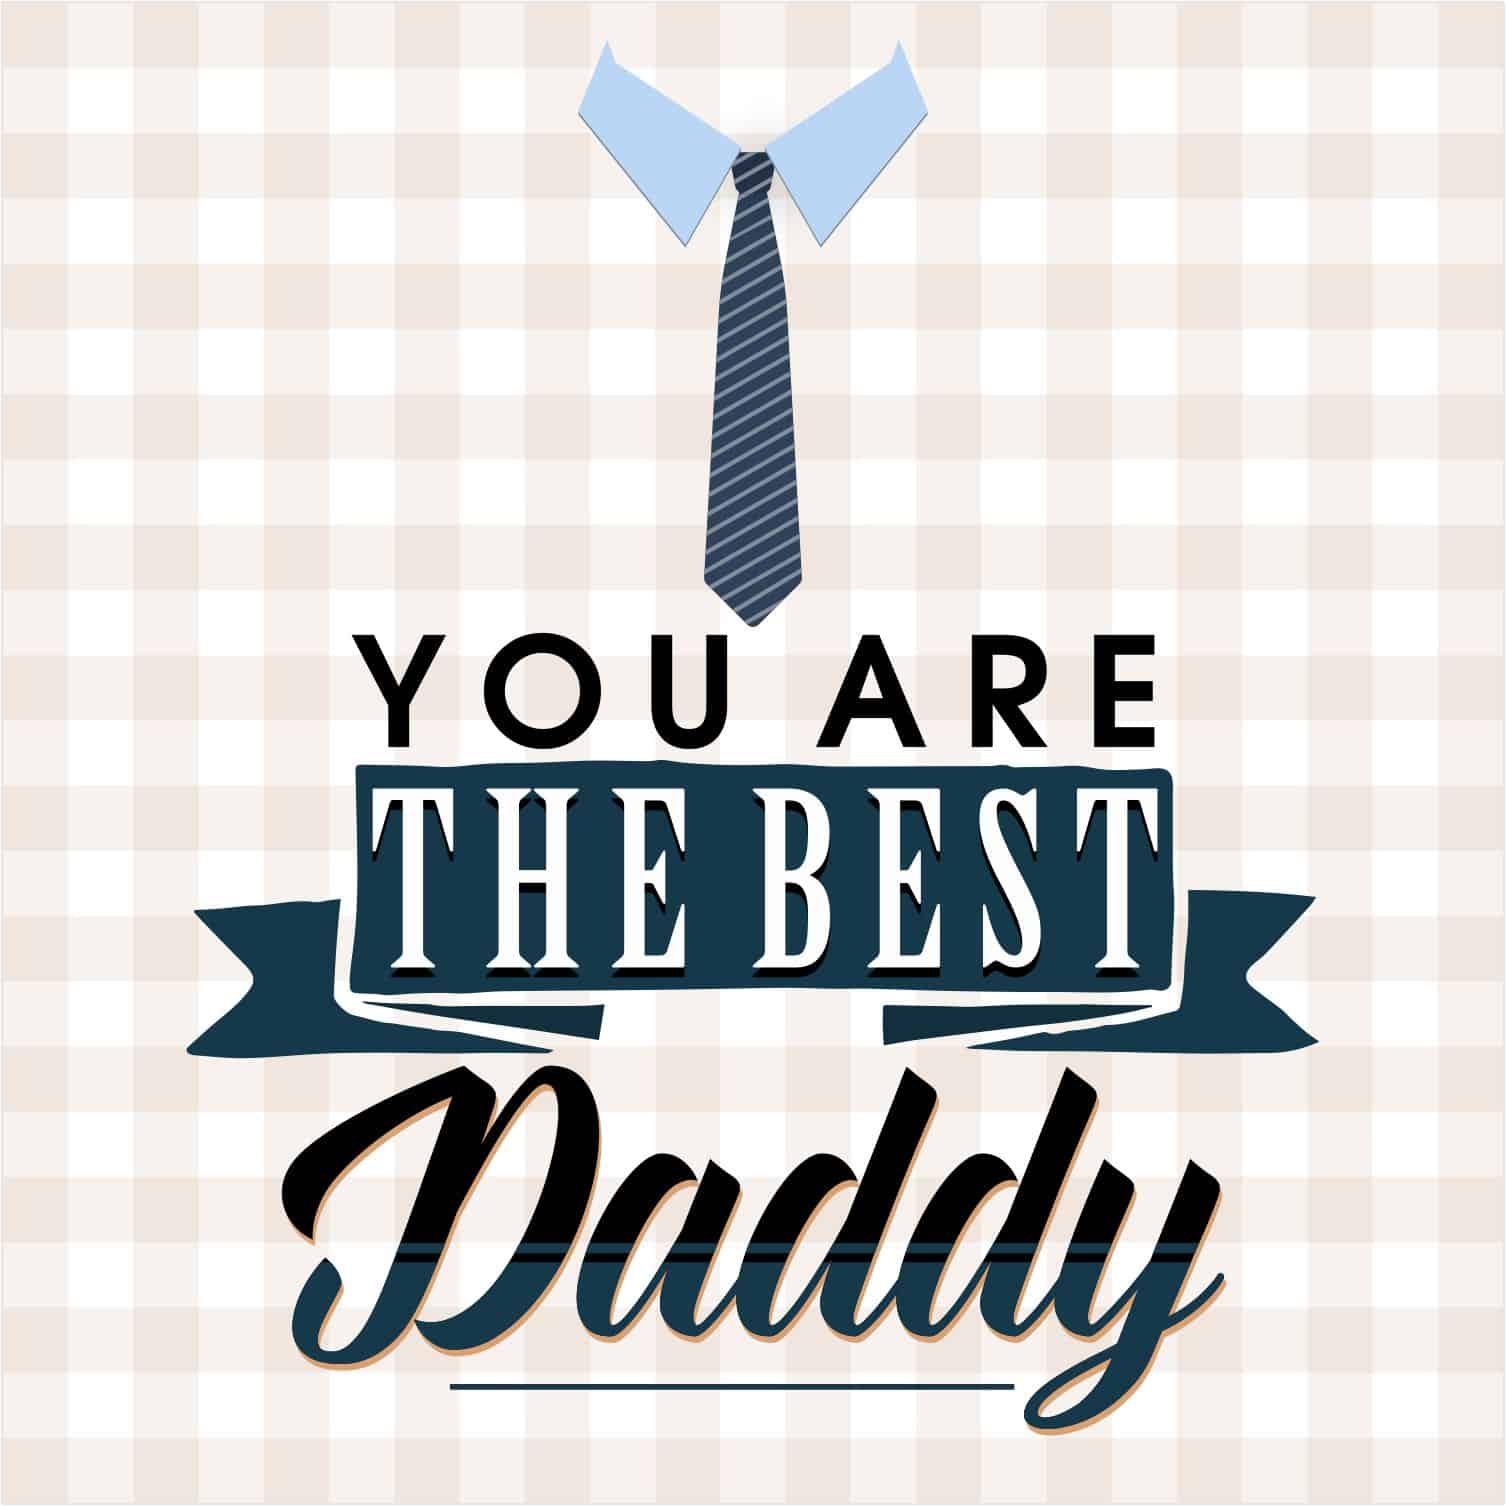 Free Printable Father's Day Cards